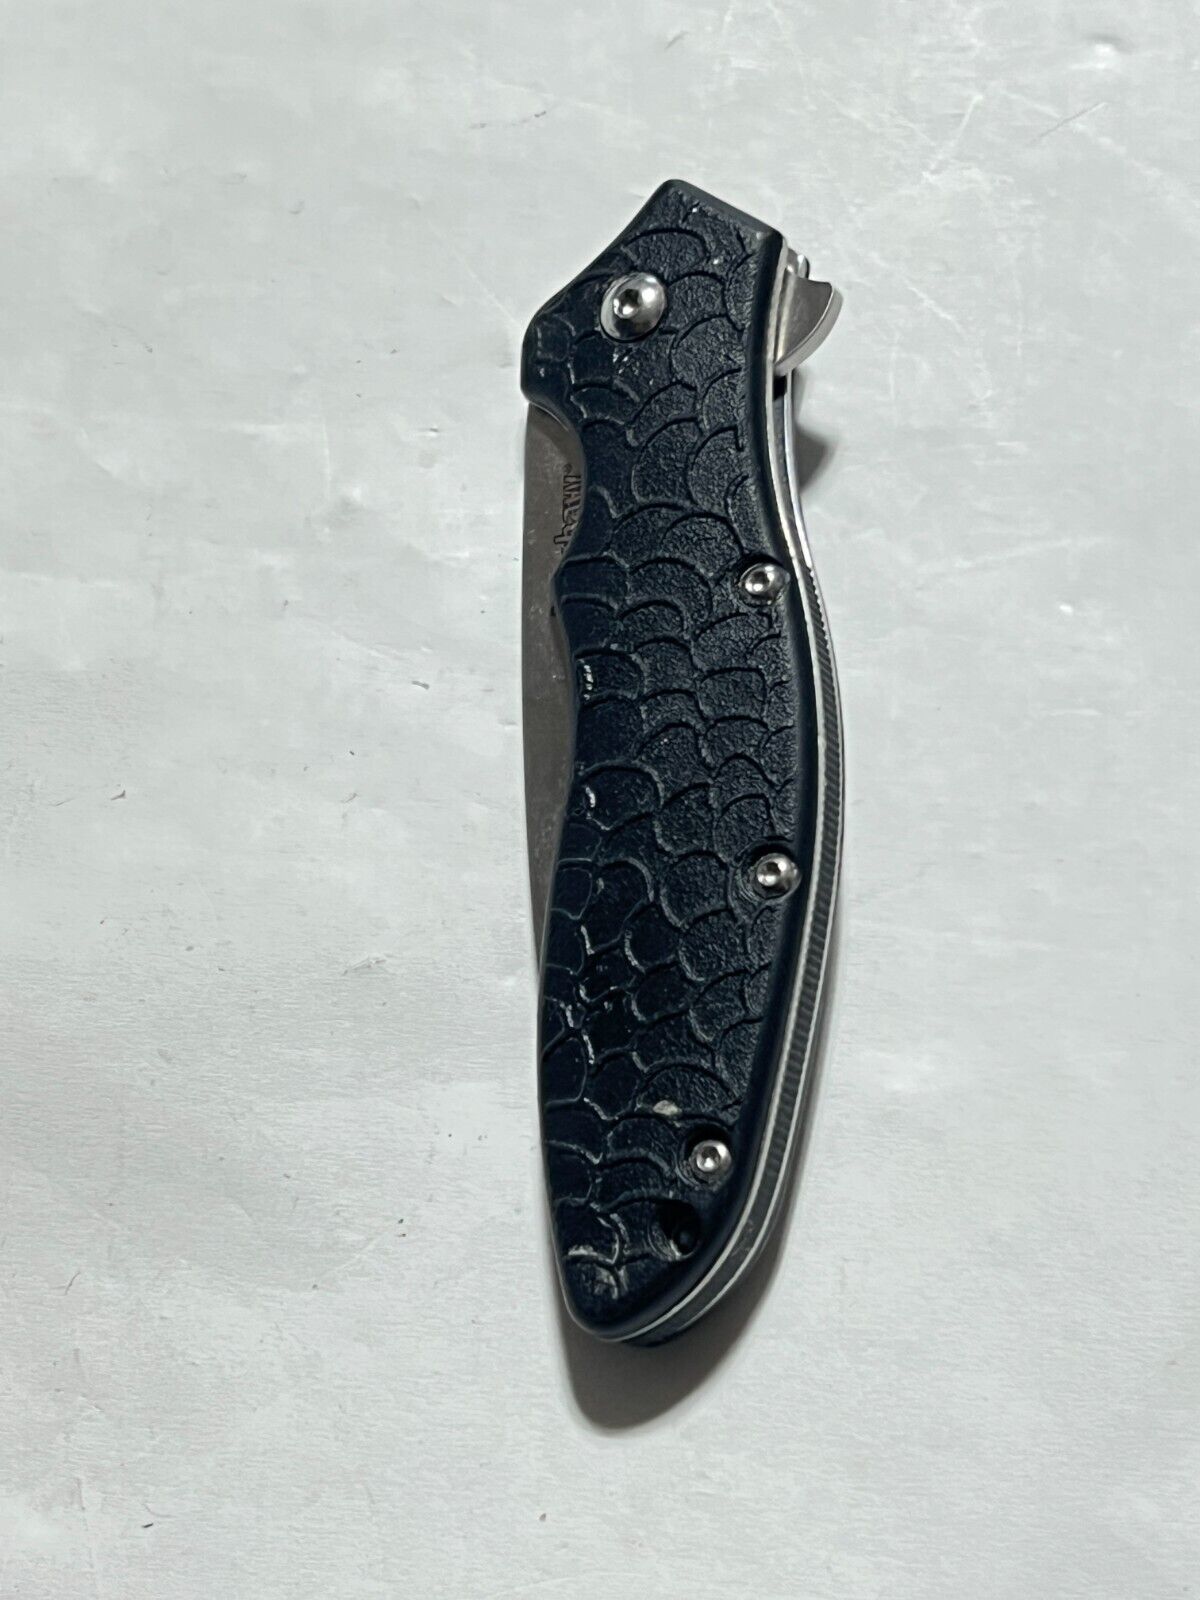 Kershaw 1830 OSO Sweet Assisted Opening Pocket Knife